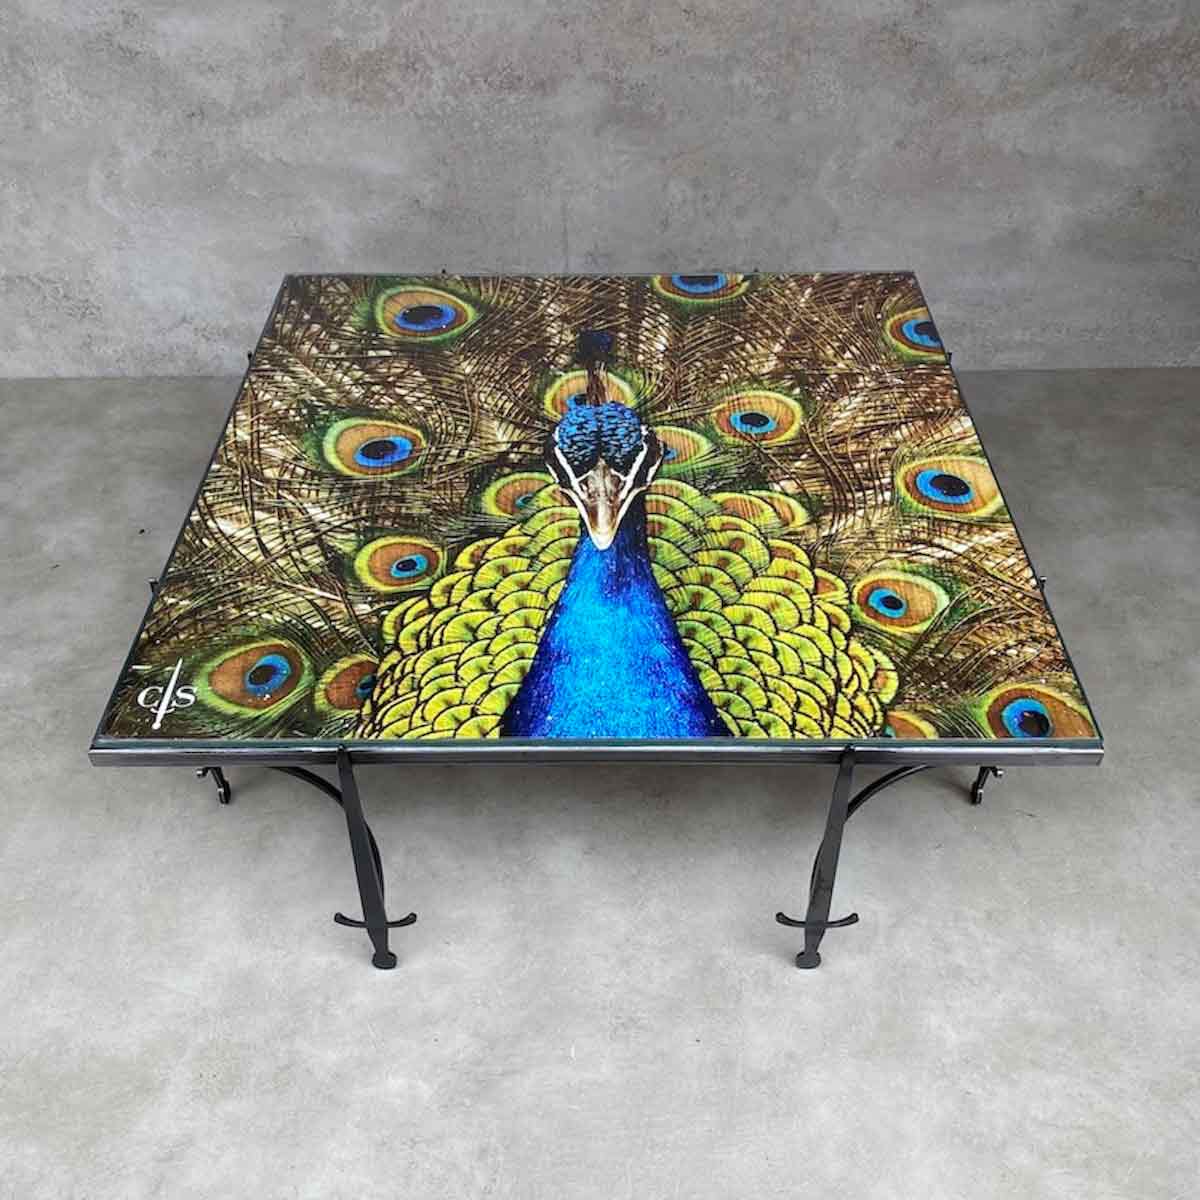 Peacock Terzo Frame Coffee Table made in the UK by Cappa E Spada for AUTHOR Interiors' collection of luxury coffee tables